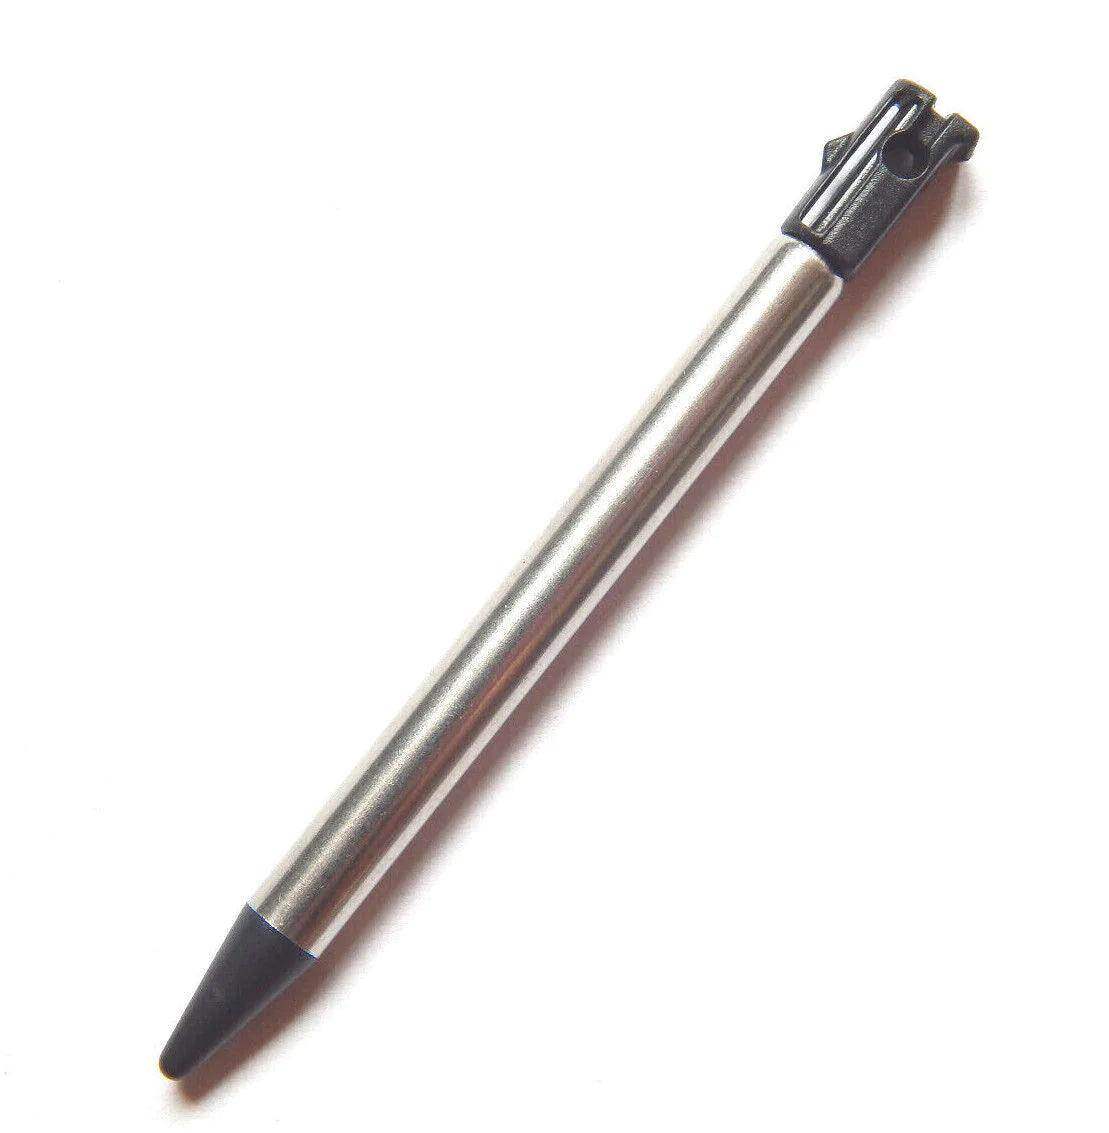 Metal Retractable Touch Screen Stylus Pen For Nintendo 3ds Console -- Jeux Video Hobby 